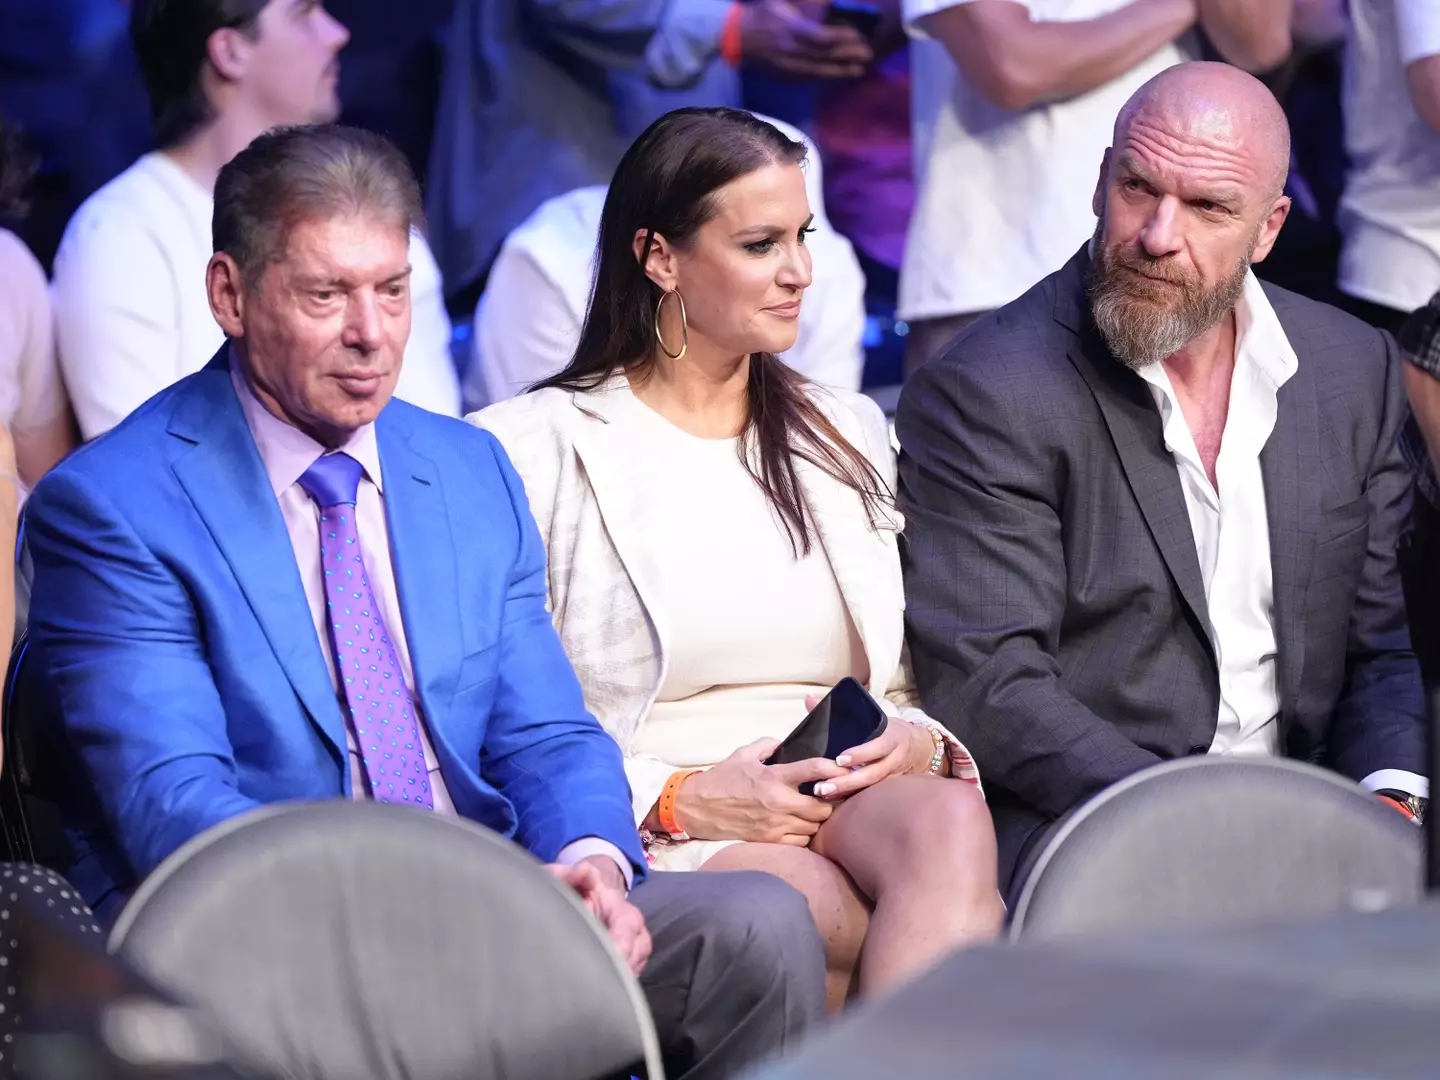 Vince McMahon with Stephanie McMahon and Triple H at a UFC event. Image: Getty